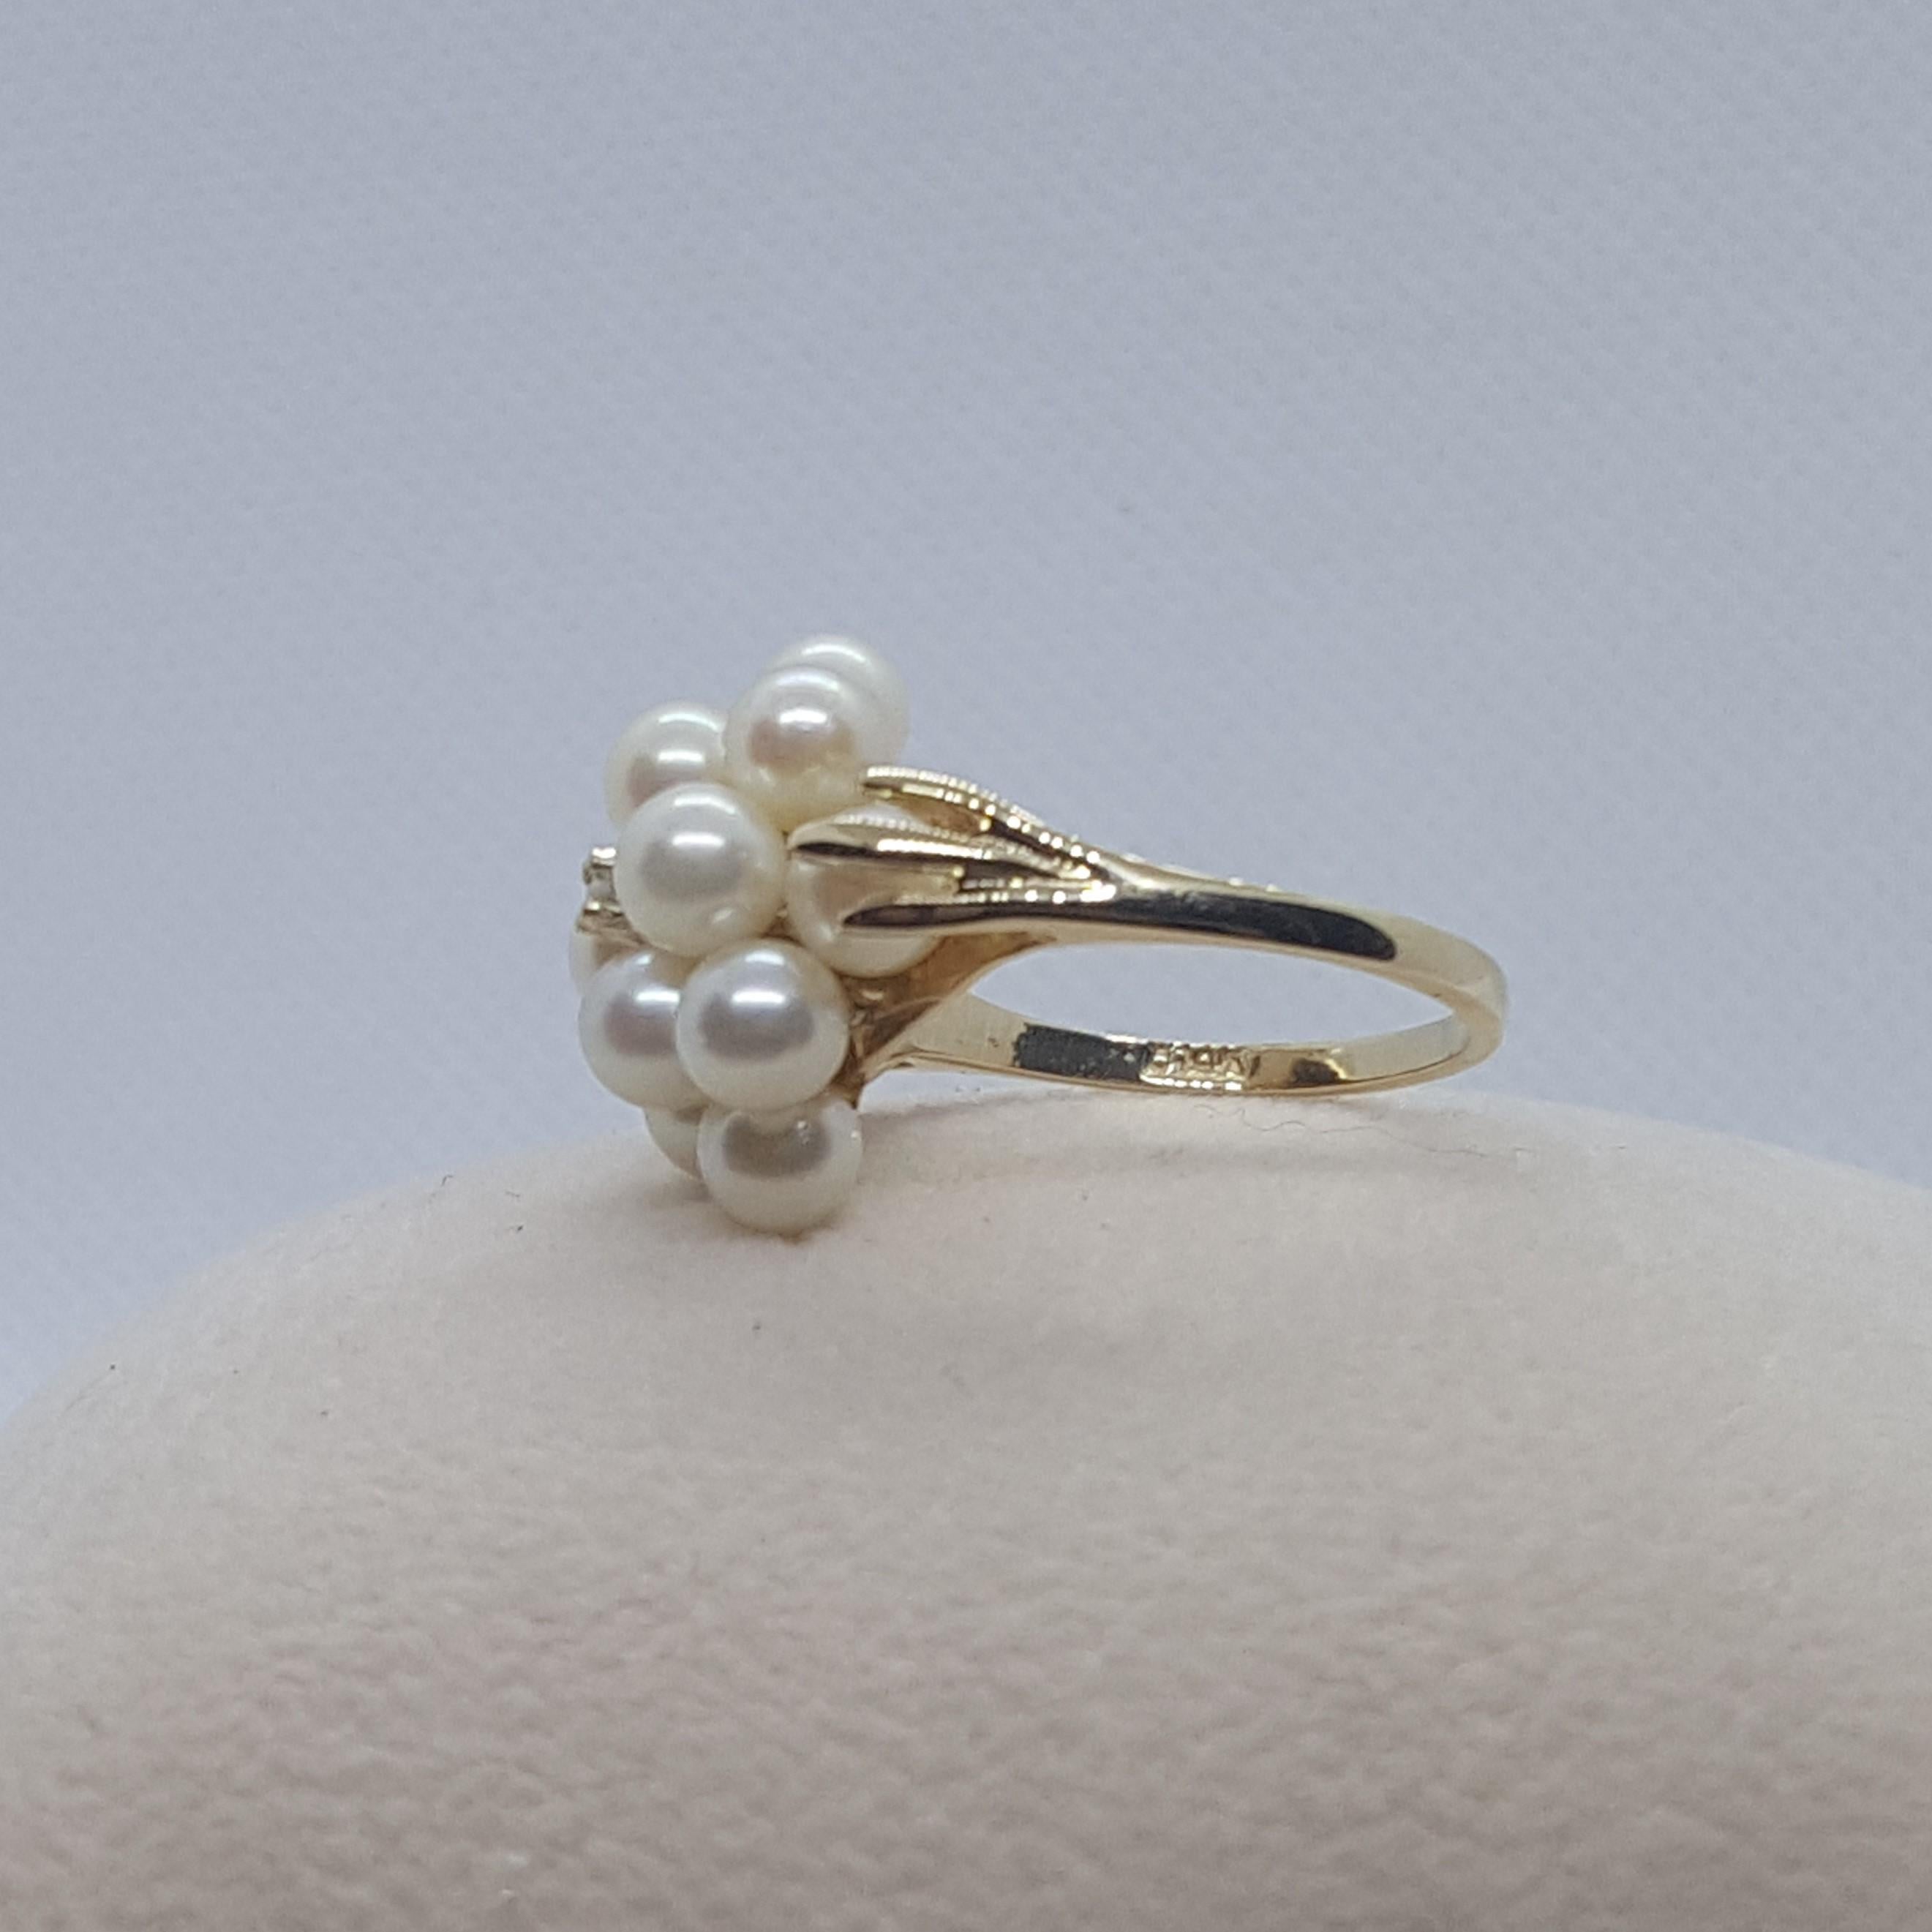 Lovely 14kt yellow gold cathedral style ring that has 12 - 4.8mm white pearls with clean lustrous nacre, accented with one single cut diamond that is approximately .02ct.  The ring is size 6.75, 5.2 grams in weight, stamped 14kt, and in very good